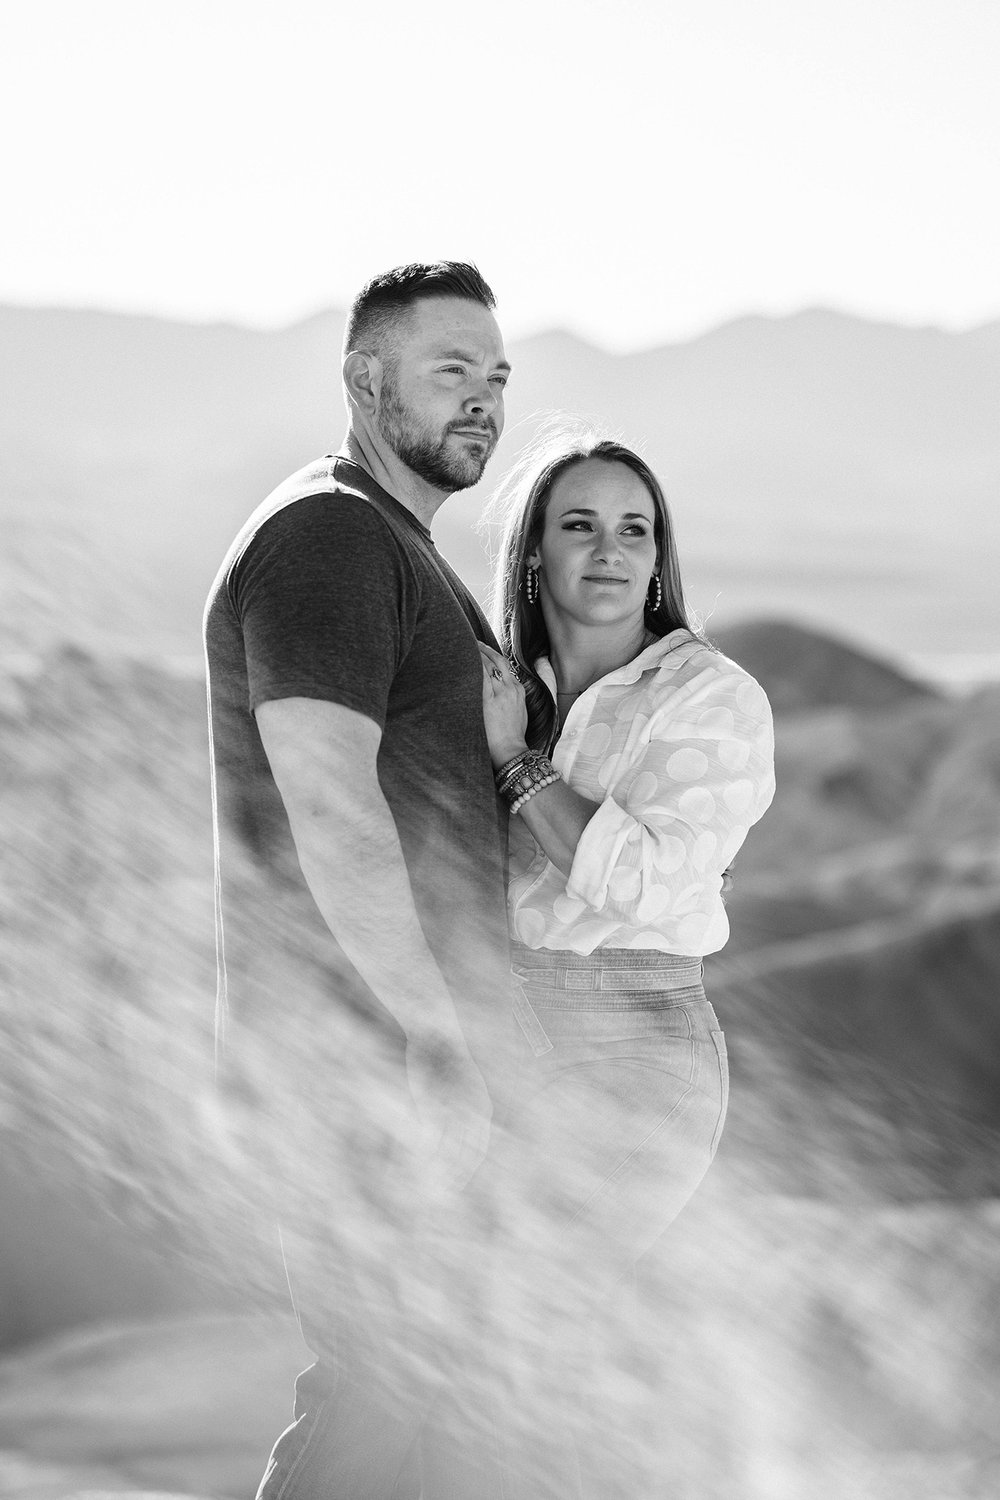 A couple poses during their engagement photography session in California.